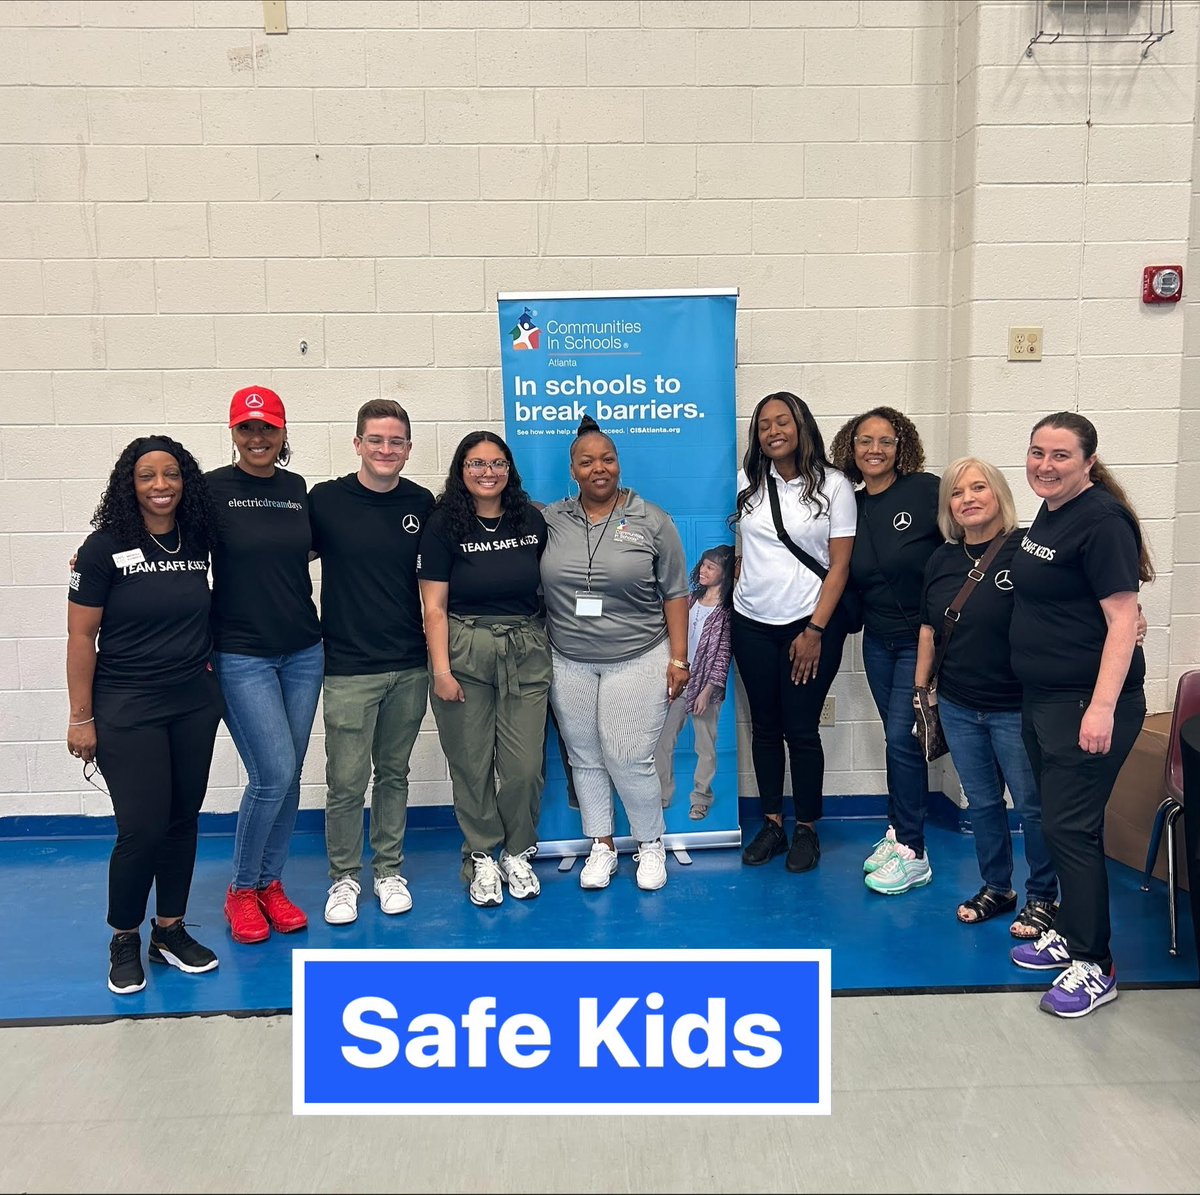 Thank you to our partner Mercedes- Benz USA for helping our kids stay safe! Volunteers from Mercedes recently visited Miles Elementary School, teaching Kindergarteners through 2nd graders about safety in and around vehicles, pedestrian safety, and bike/helmet rules of the road.